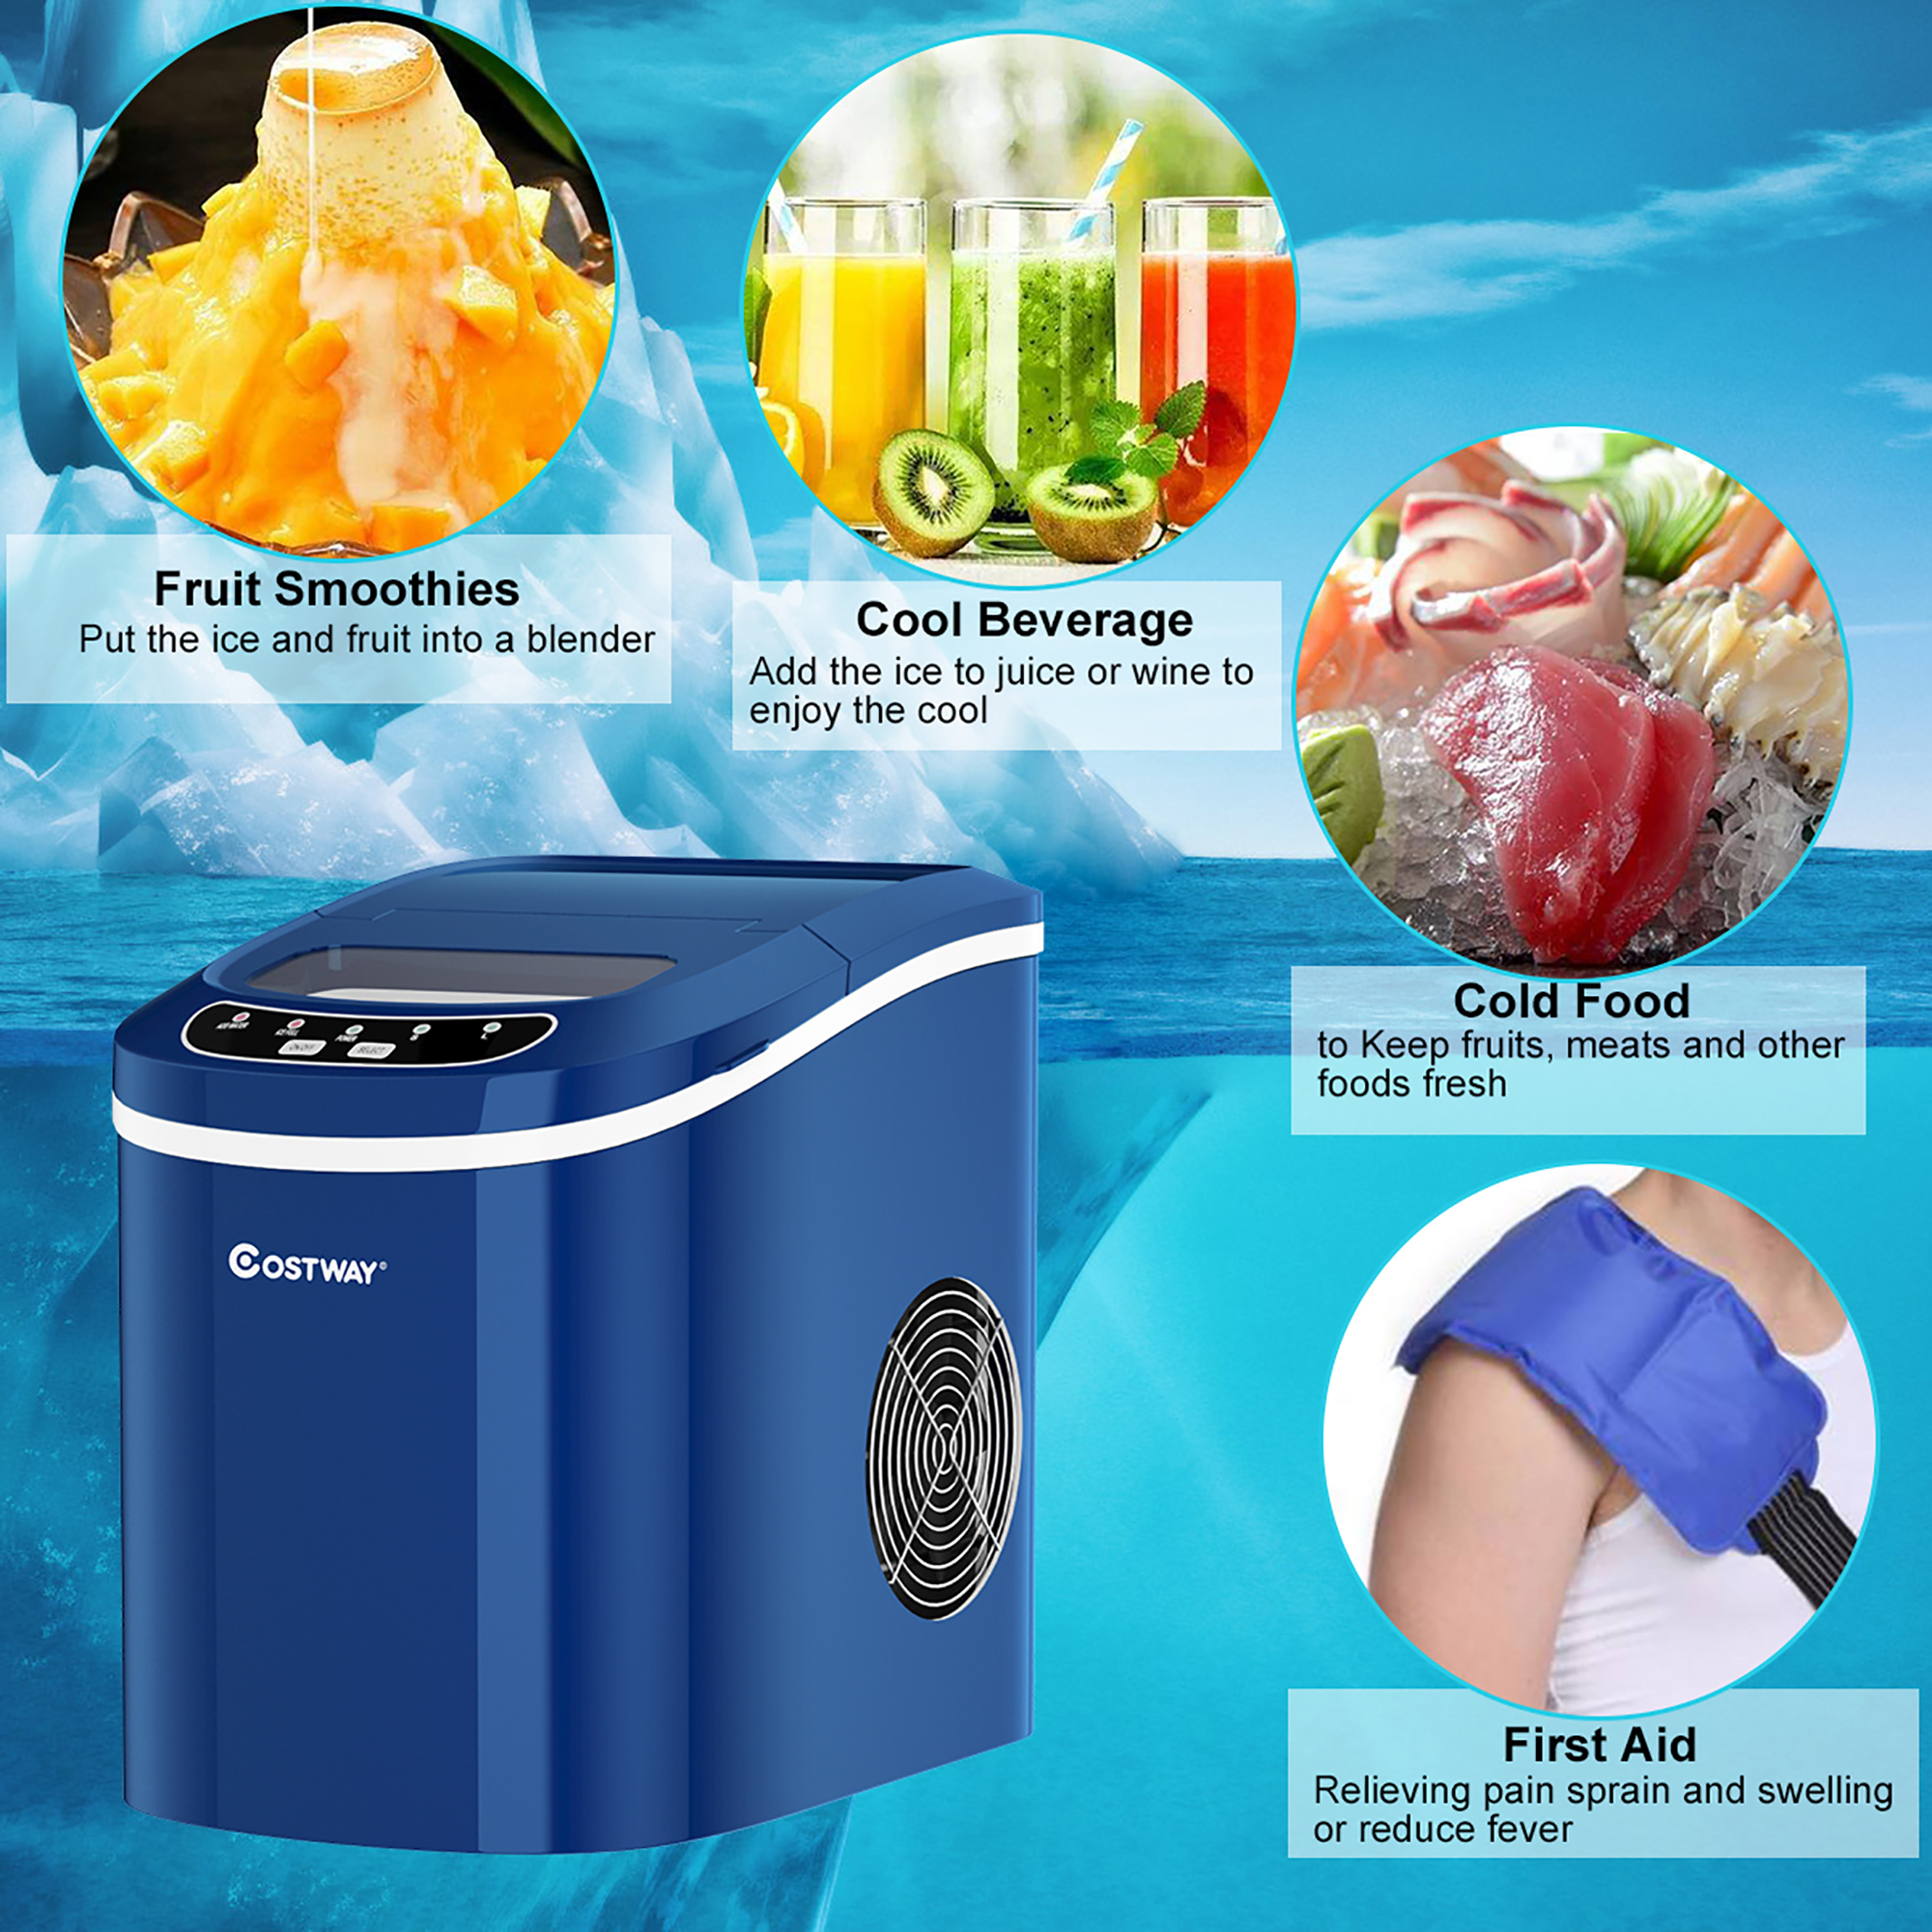 Costway Portable Compact Electric Ice Maker Machine Mini Cube 26lb/Day ABS Navy